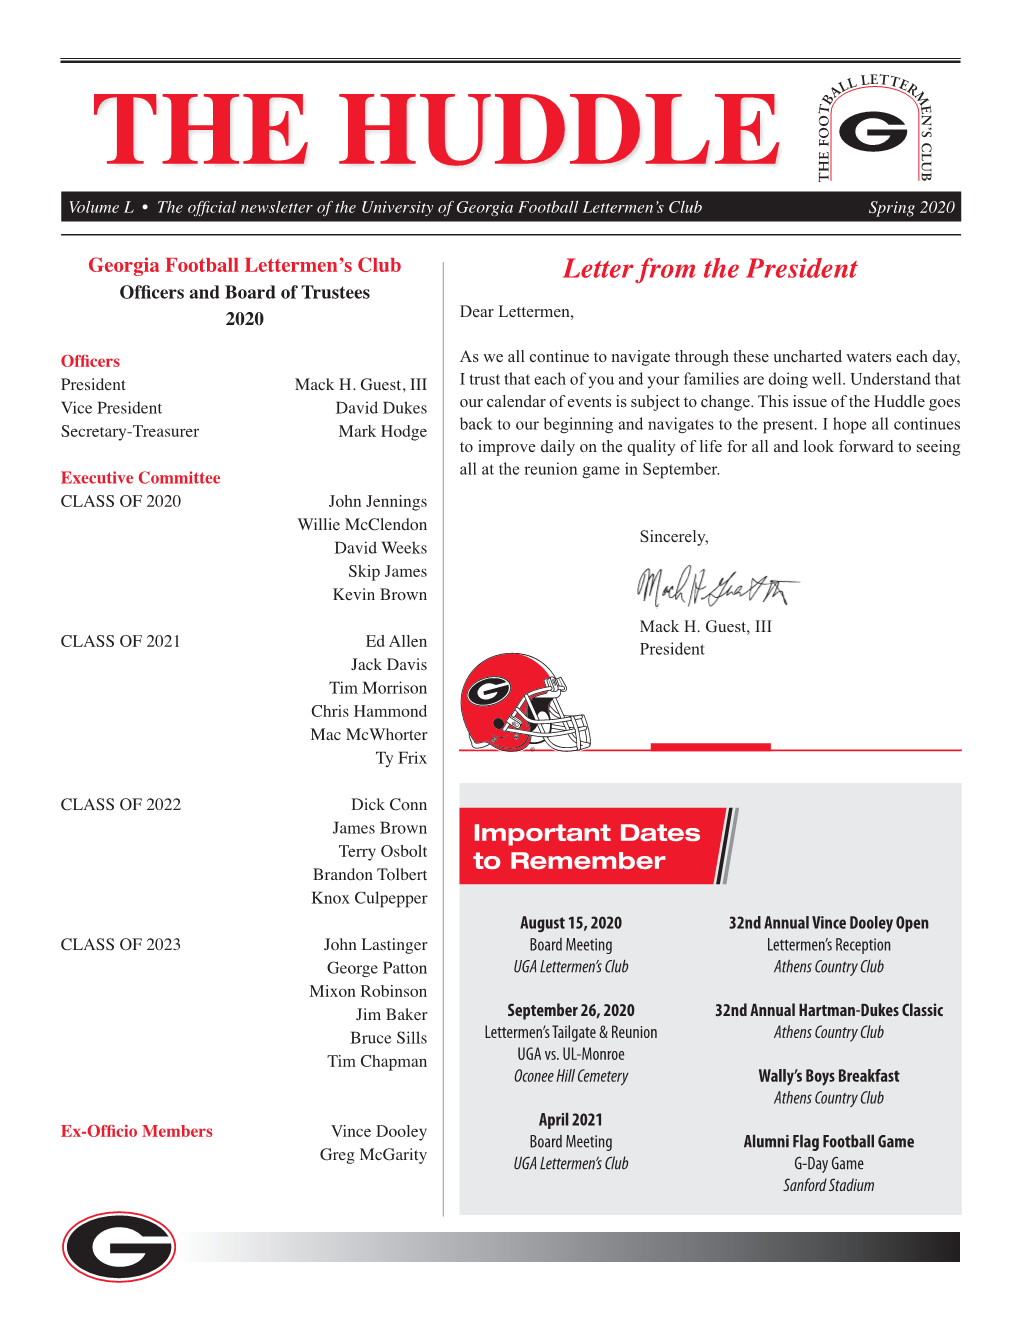 THE HUDDLE Volume L • the Official Newsletter of the University of Georgia Football Lettermen’S Club Spring 2020